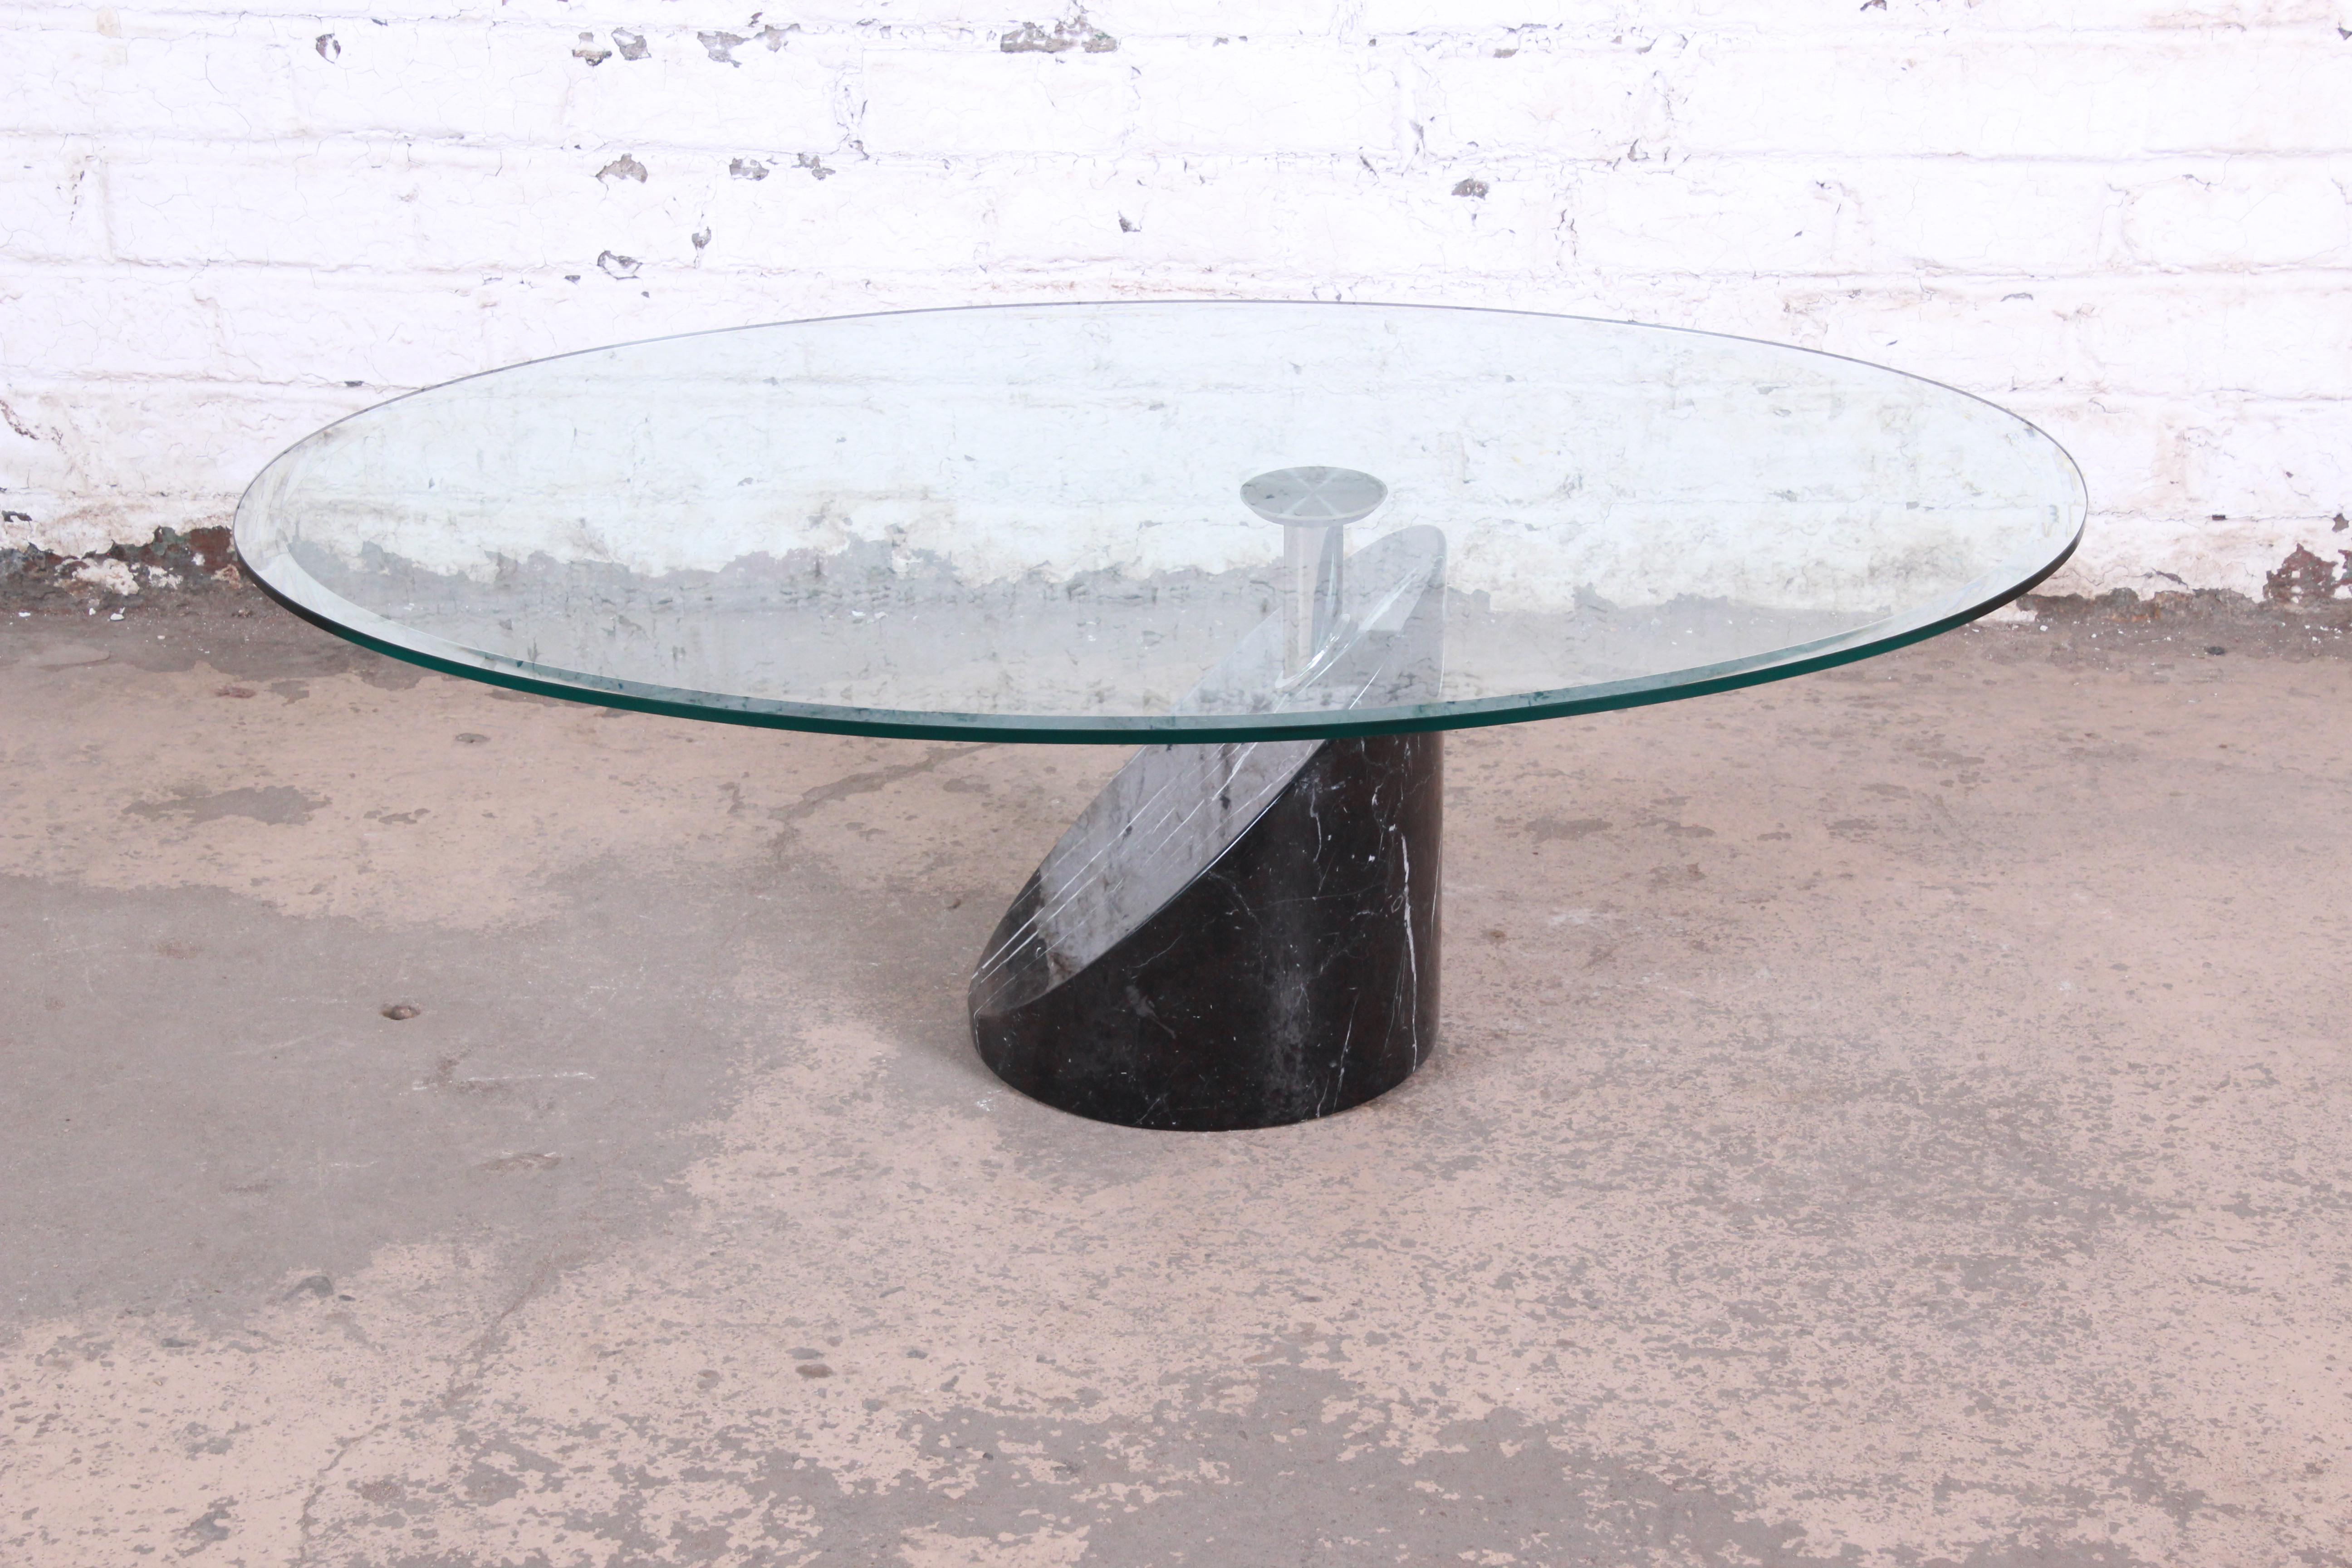 A gorgeous modern Italian marble, chrome, and glass coffee or cocktail table by Cattelan Italia. The table features a stunning heavy black marble base with white veining and an oval beveled glass top in a cantilevered design. The tabletop uniquely